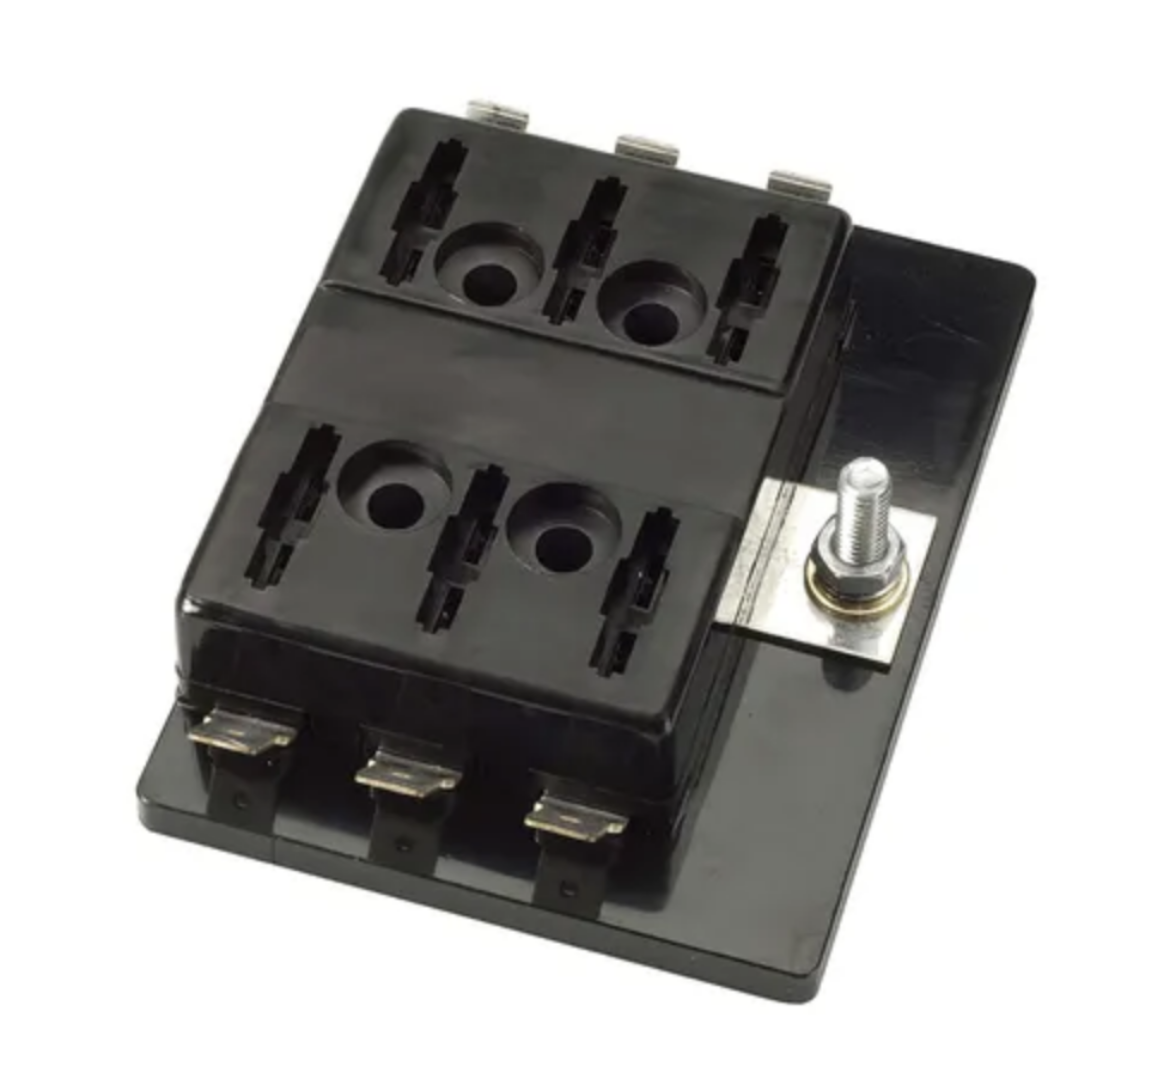 Picture of FUSE HOLDER 6 WAY STANDARD ATS BLADE WITH COMMON POS STUD